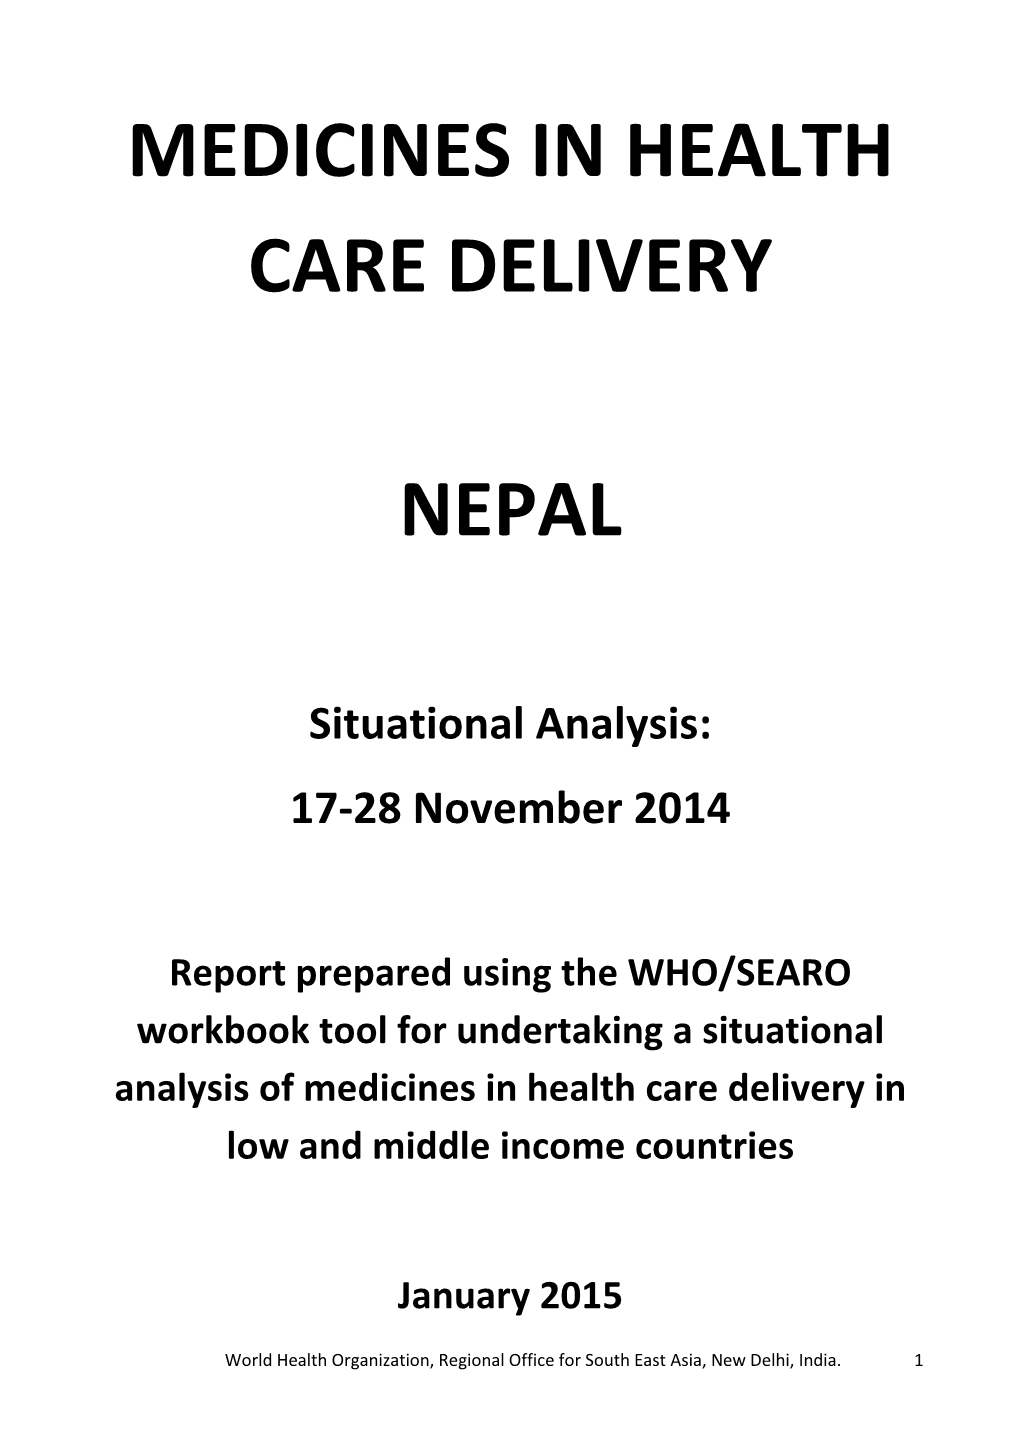 Medicines in Health Care Delivery Nepal